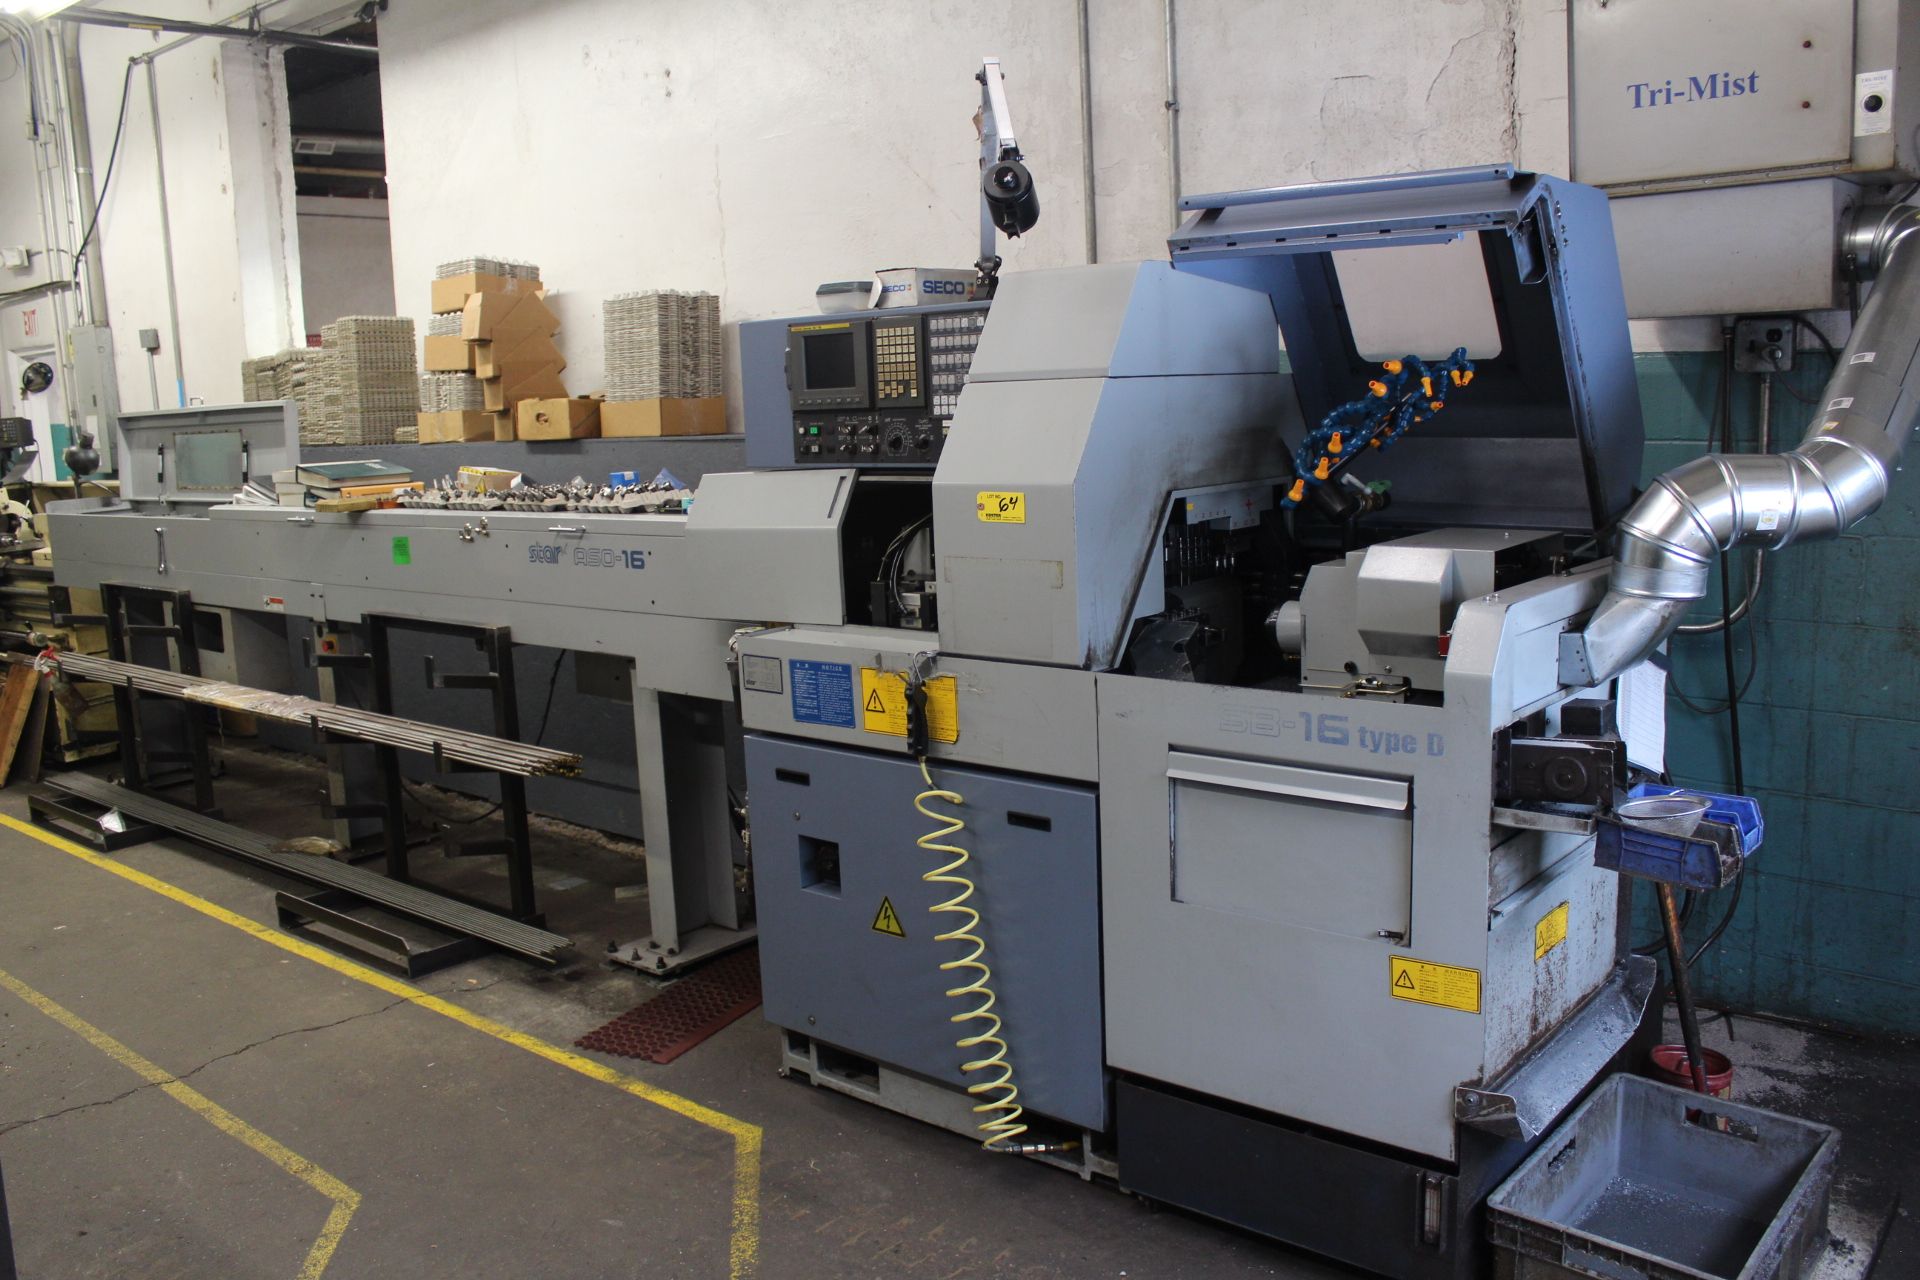 STAR MDL. SB-16 TYPE D MULTI-AXIS SWISS TYPE CNC TURNING CENTER, S/N: 1213, (2008), CAT. NO. 053, - Image 4 of 7